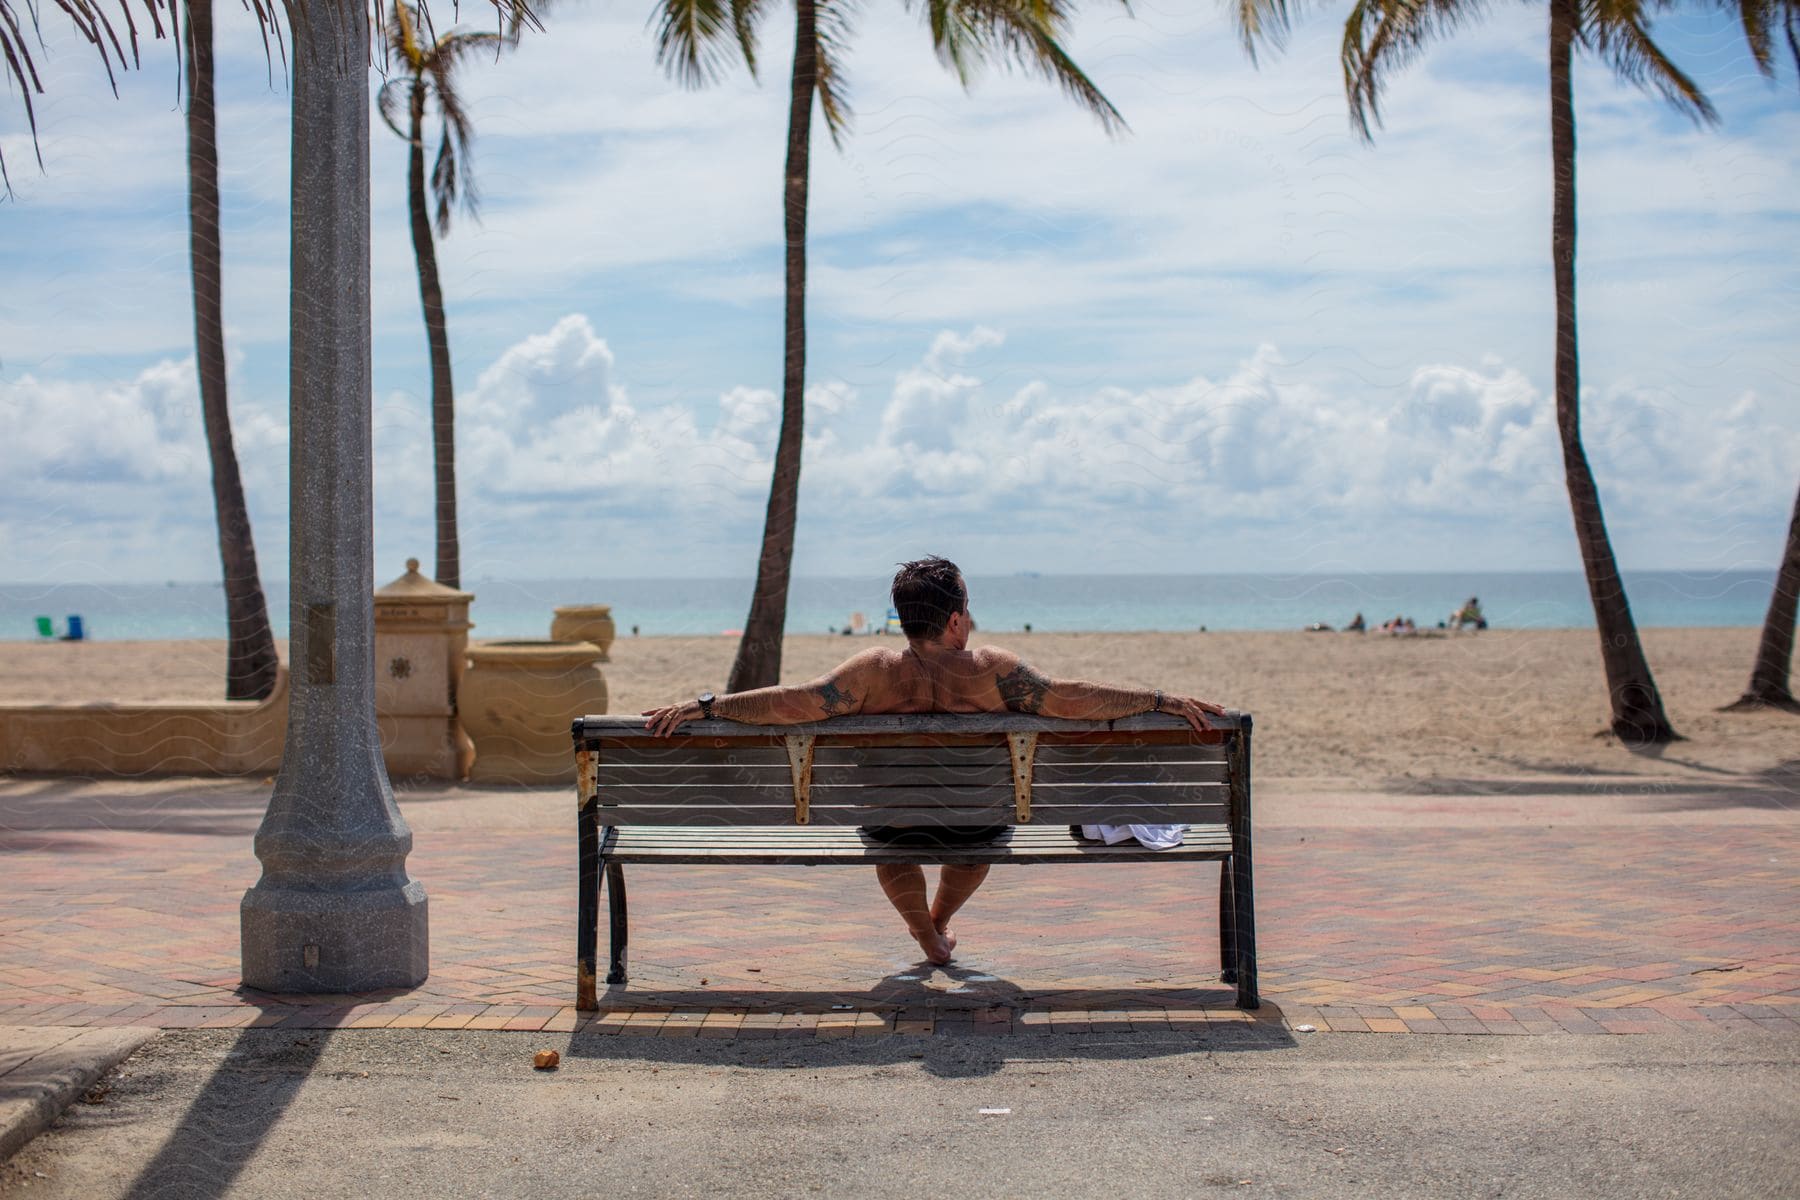 A man sitting on a bench near palm trees by the beach